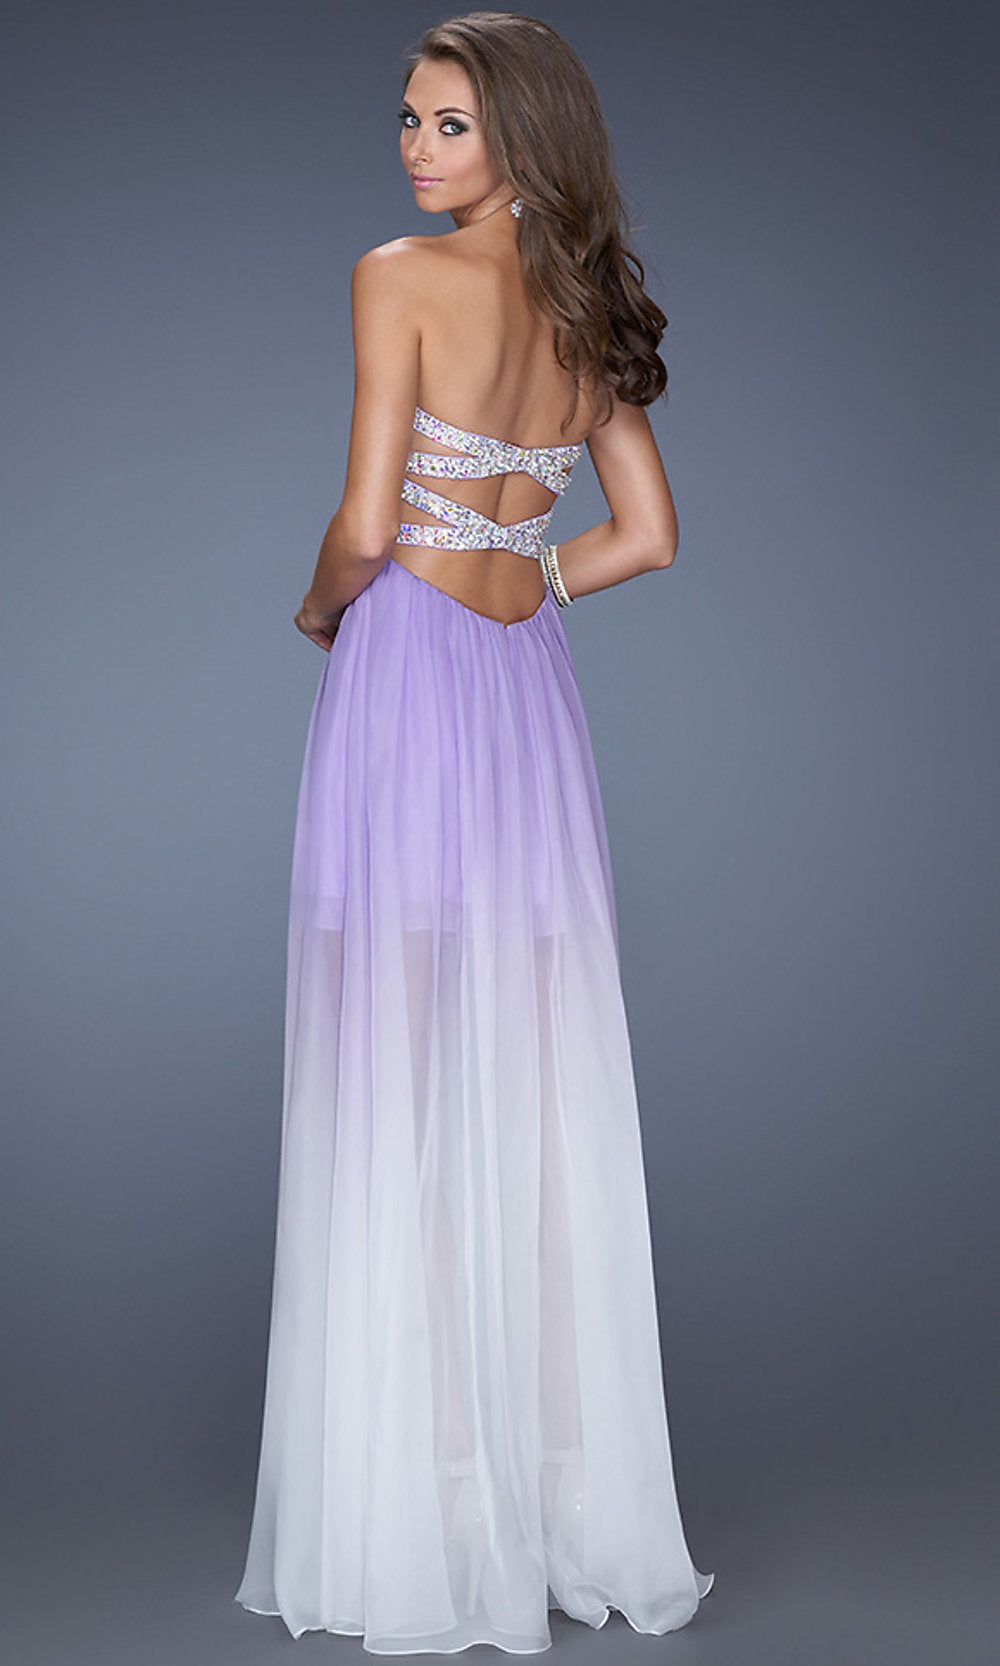 Strapless Ombre High-Low Prom Dress by La Femme